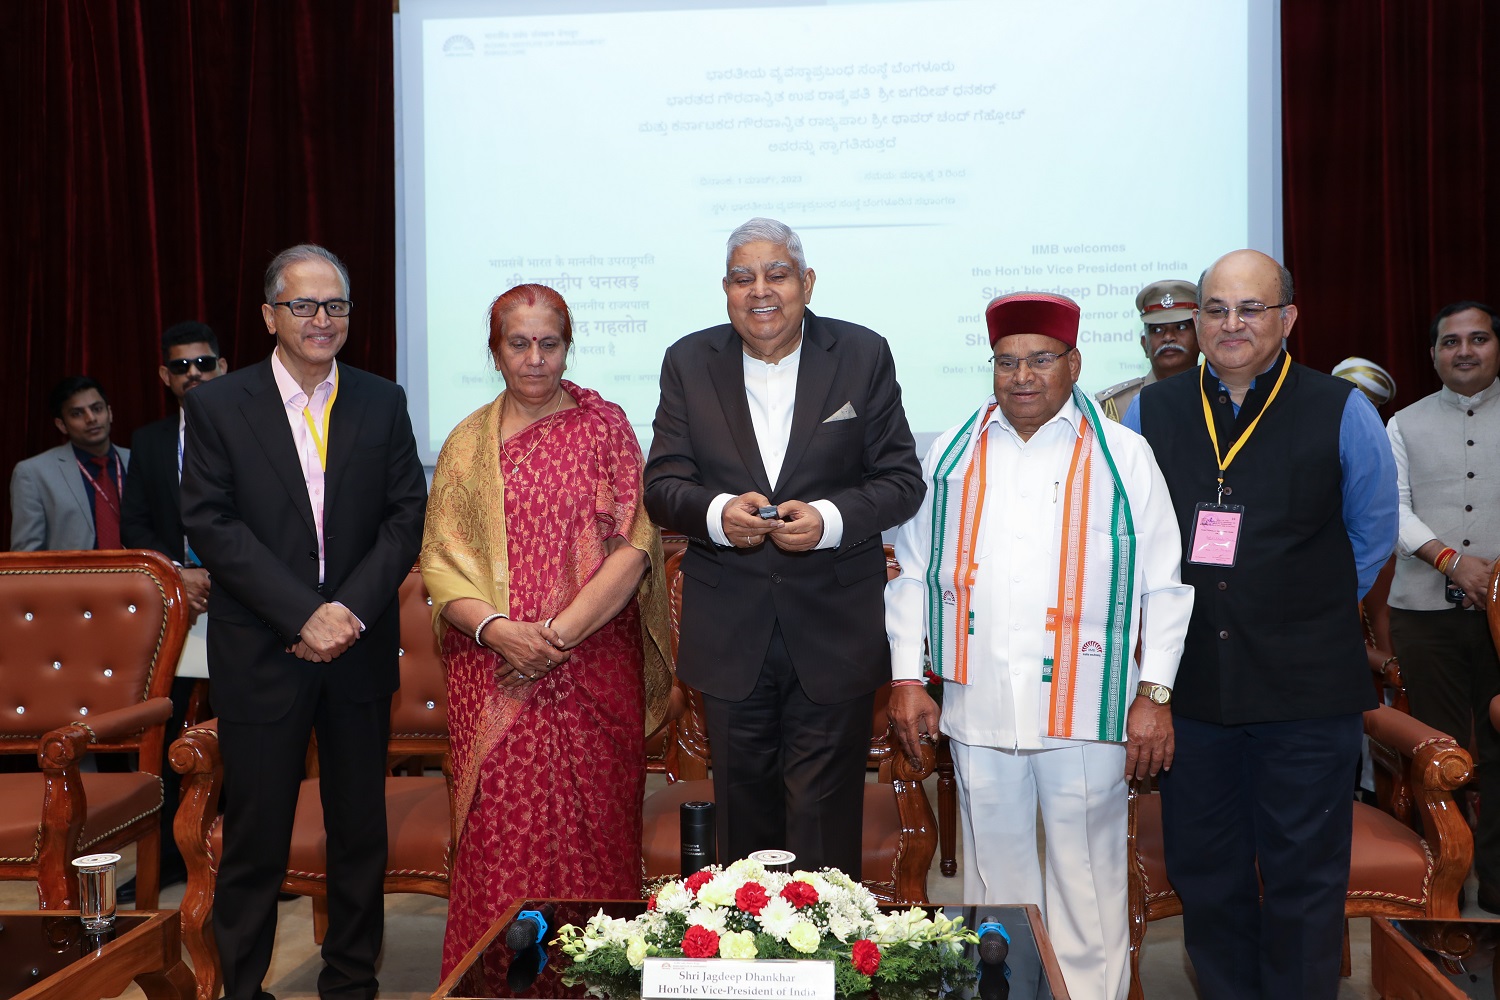 Shri Jagdeep Dhankar, Vice President of India, virtually inaugurates the MDC building at IIMB’s second campus, in the presence of Shri Thaawar Chand Gehlot, Governor of Karnataka, on 1st March 2023, from IIMB’s Bannerghatta Road campus. Dr Devi Shetty, Chairperson, Board of Governors, IIMB, and Professor Rishikesha T Krishnan, Director, IIMB, look on.